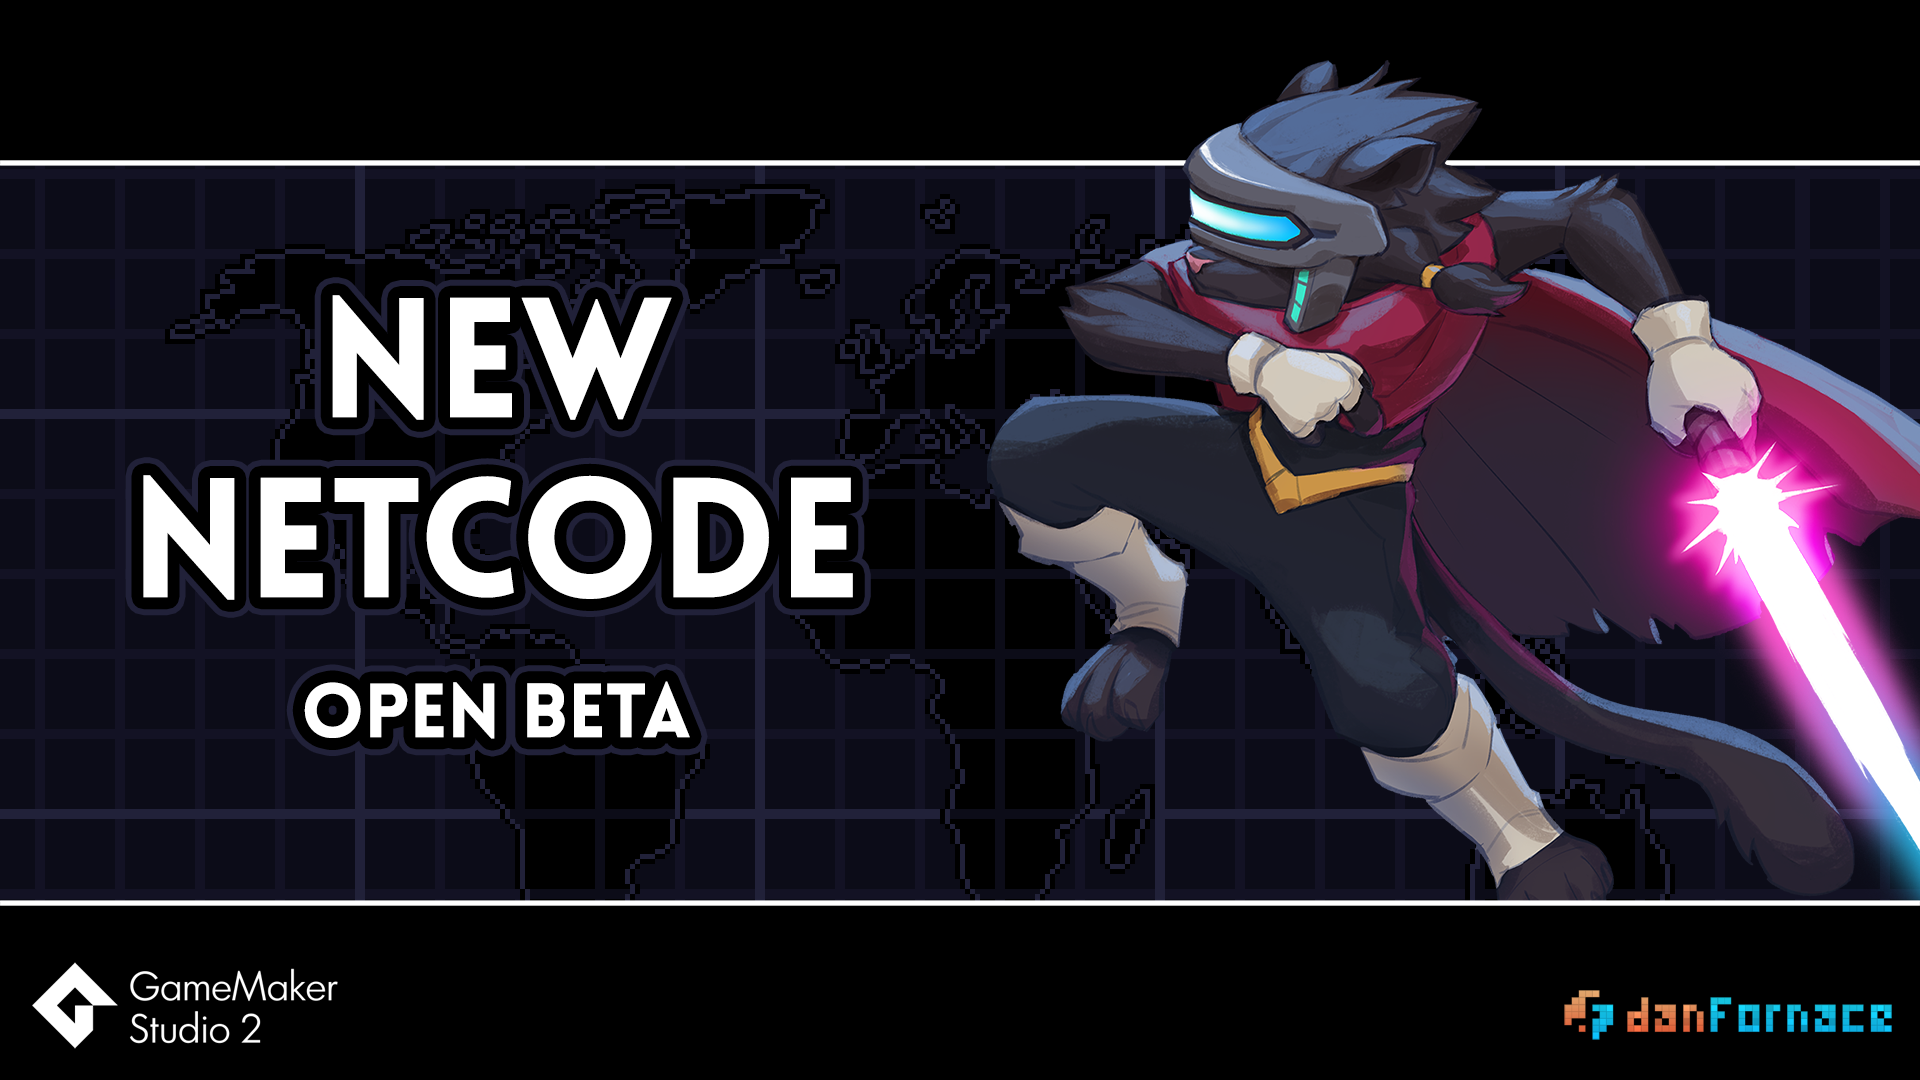 rivals of aether steam key